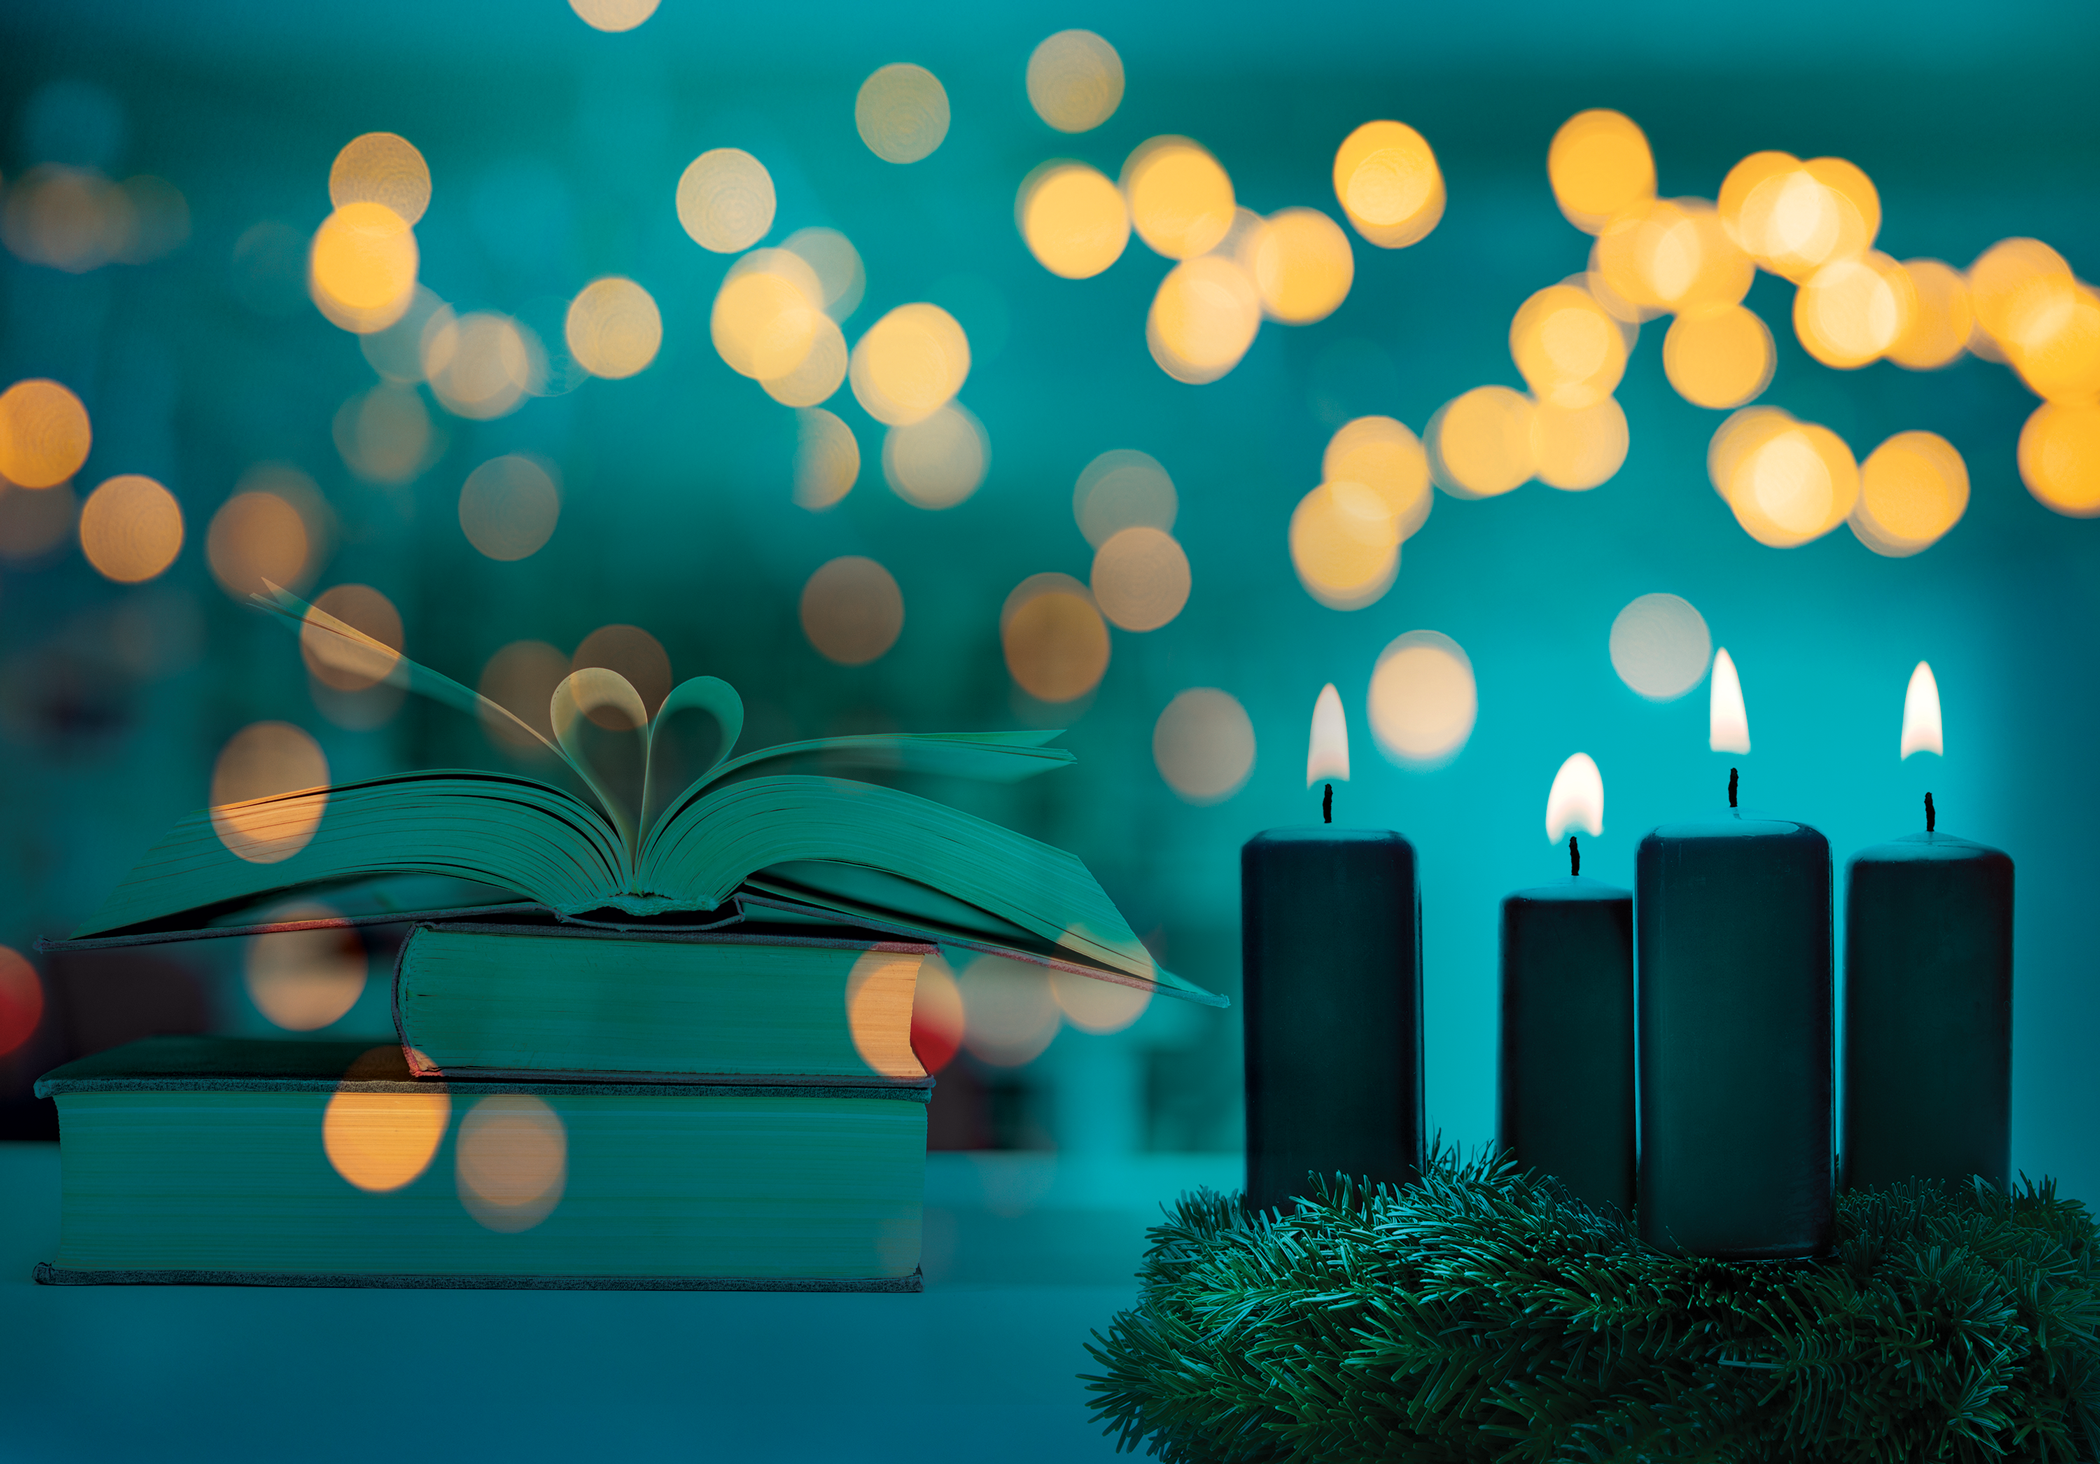 Stack of books on a table behind candles and sparkling lights 